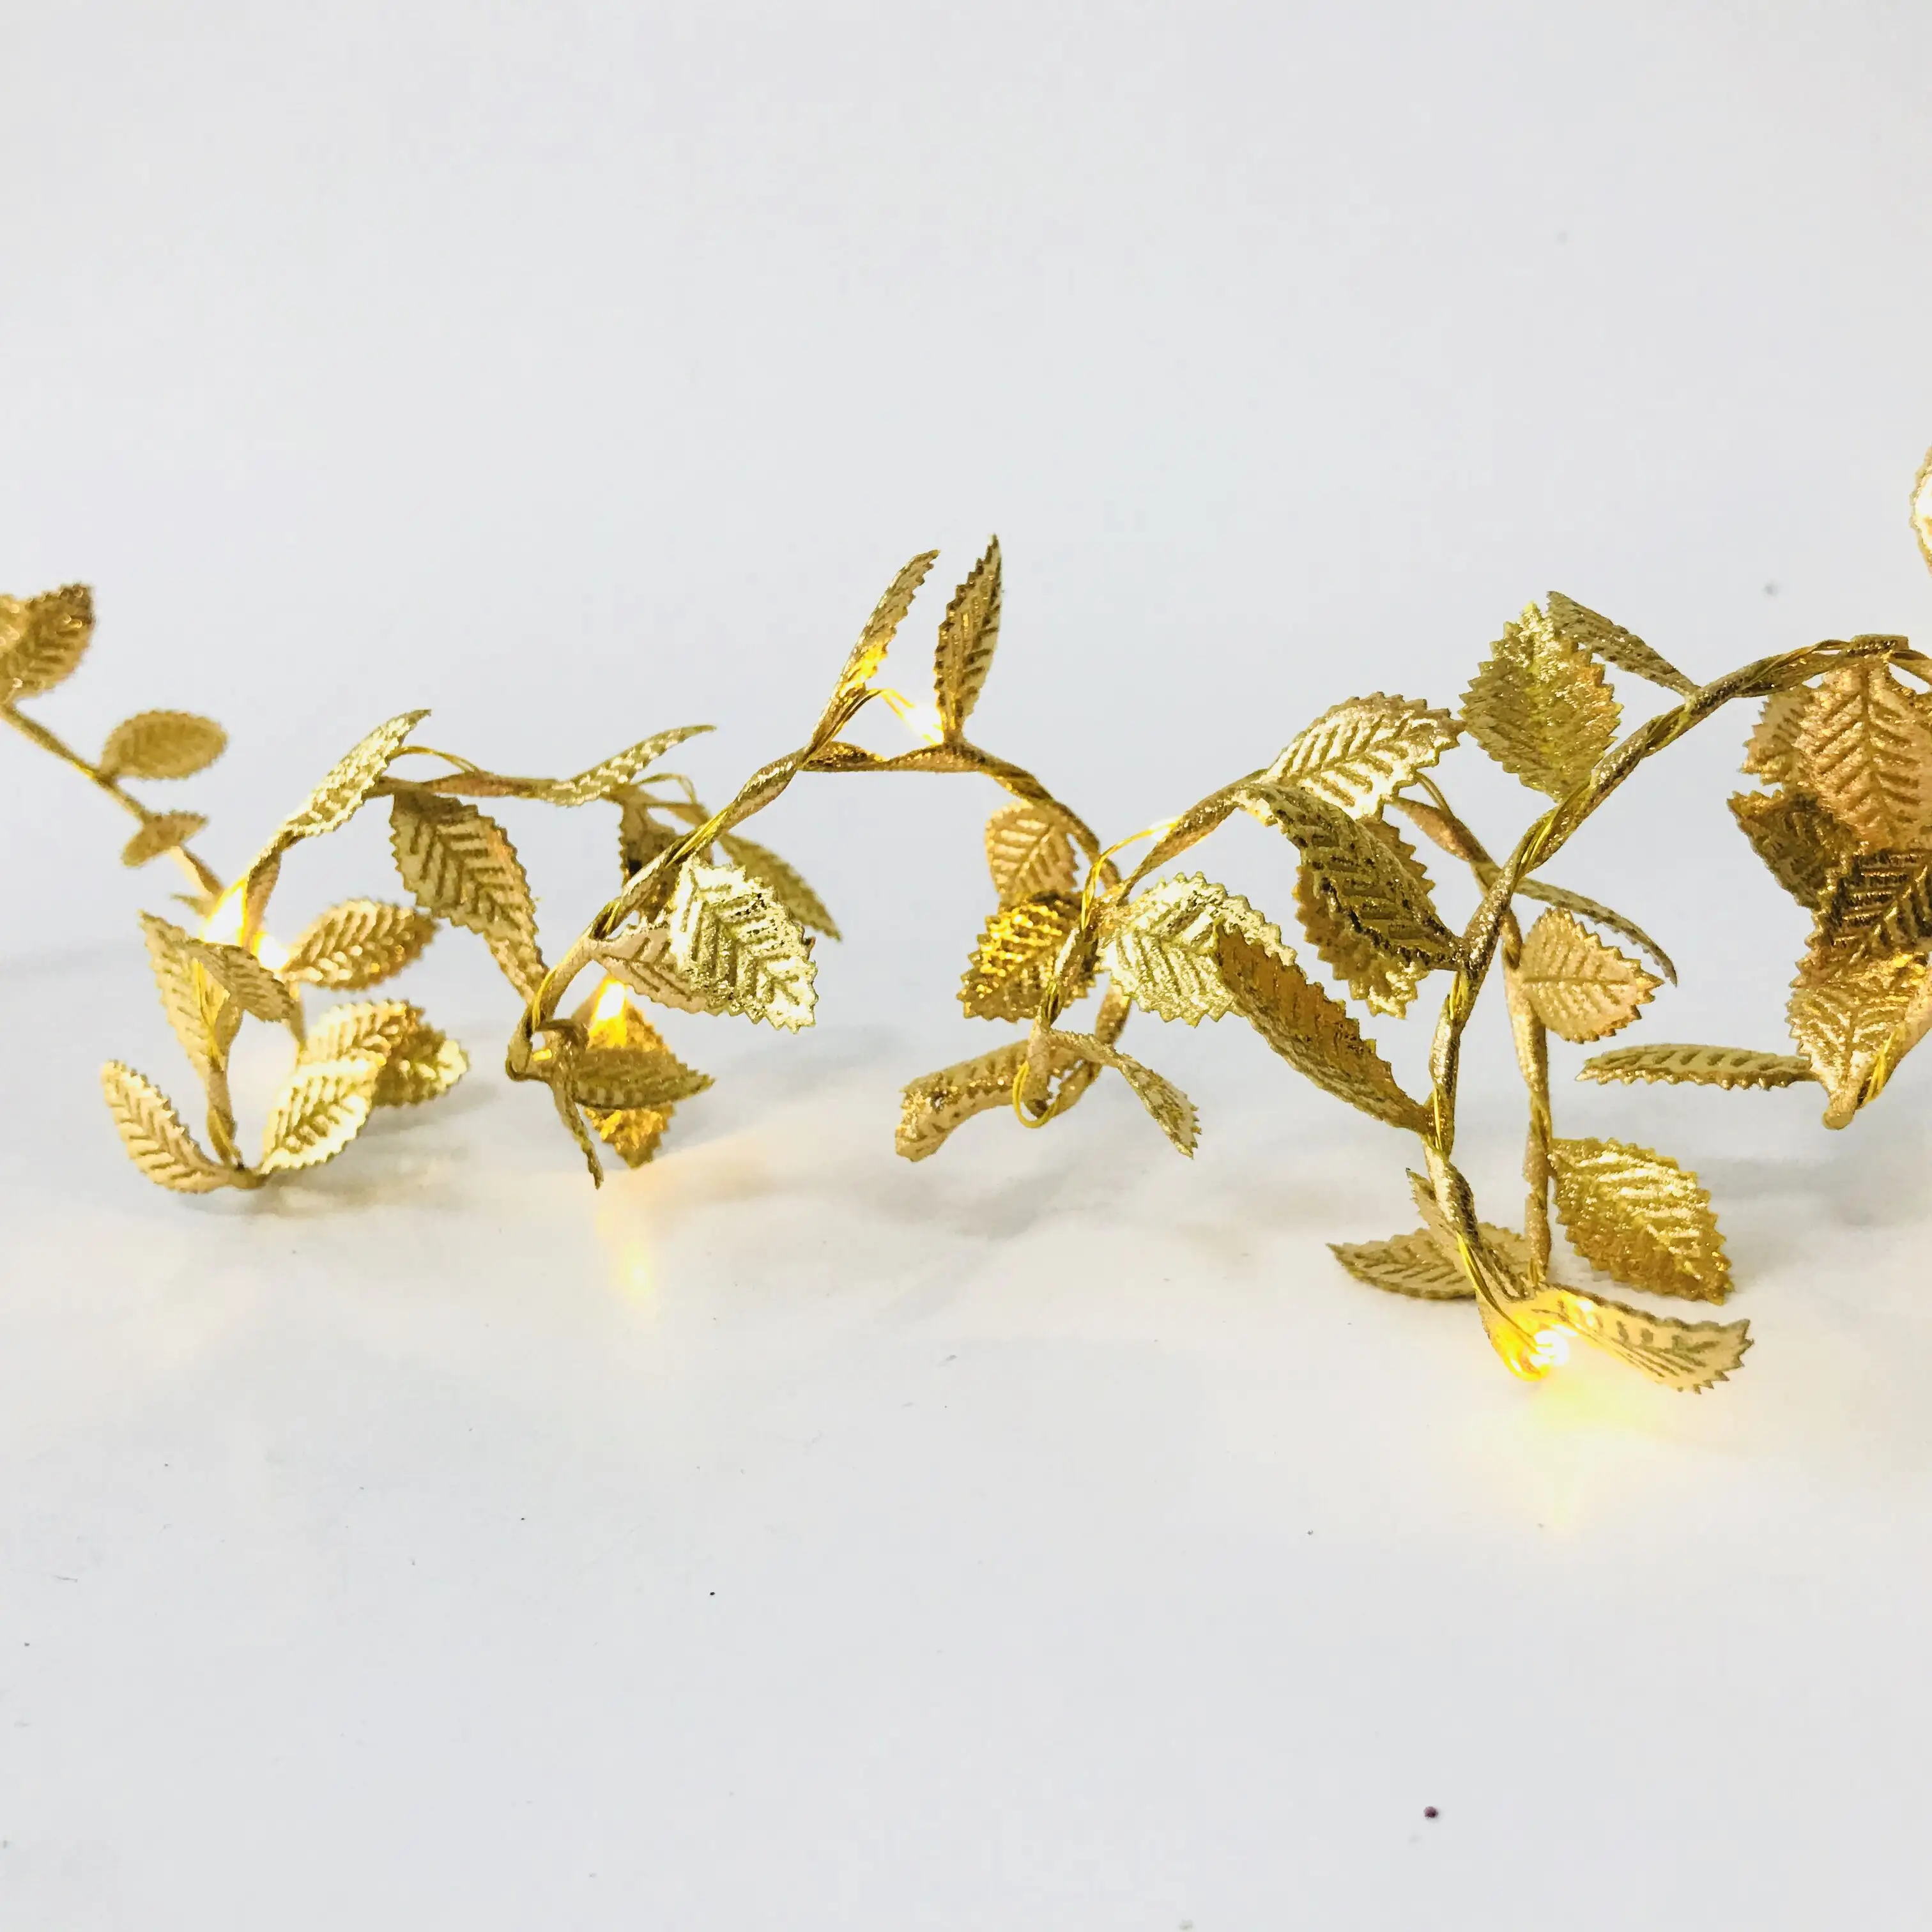 30 Count Warm White LED Copper Wire Light Battery Operated Gold Leaf Garland String Lights Fairy Microdot Light For Garden Decor